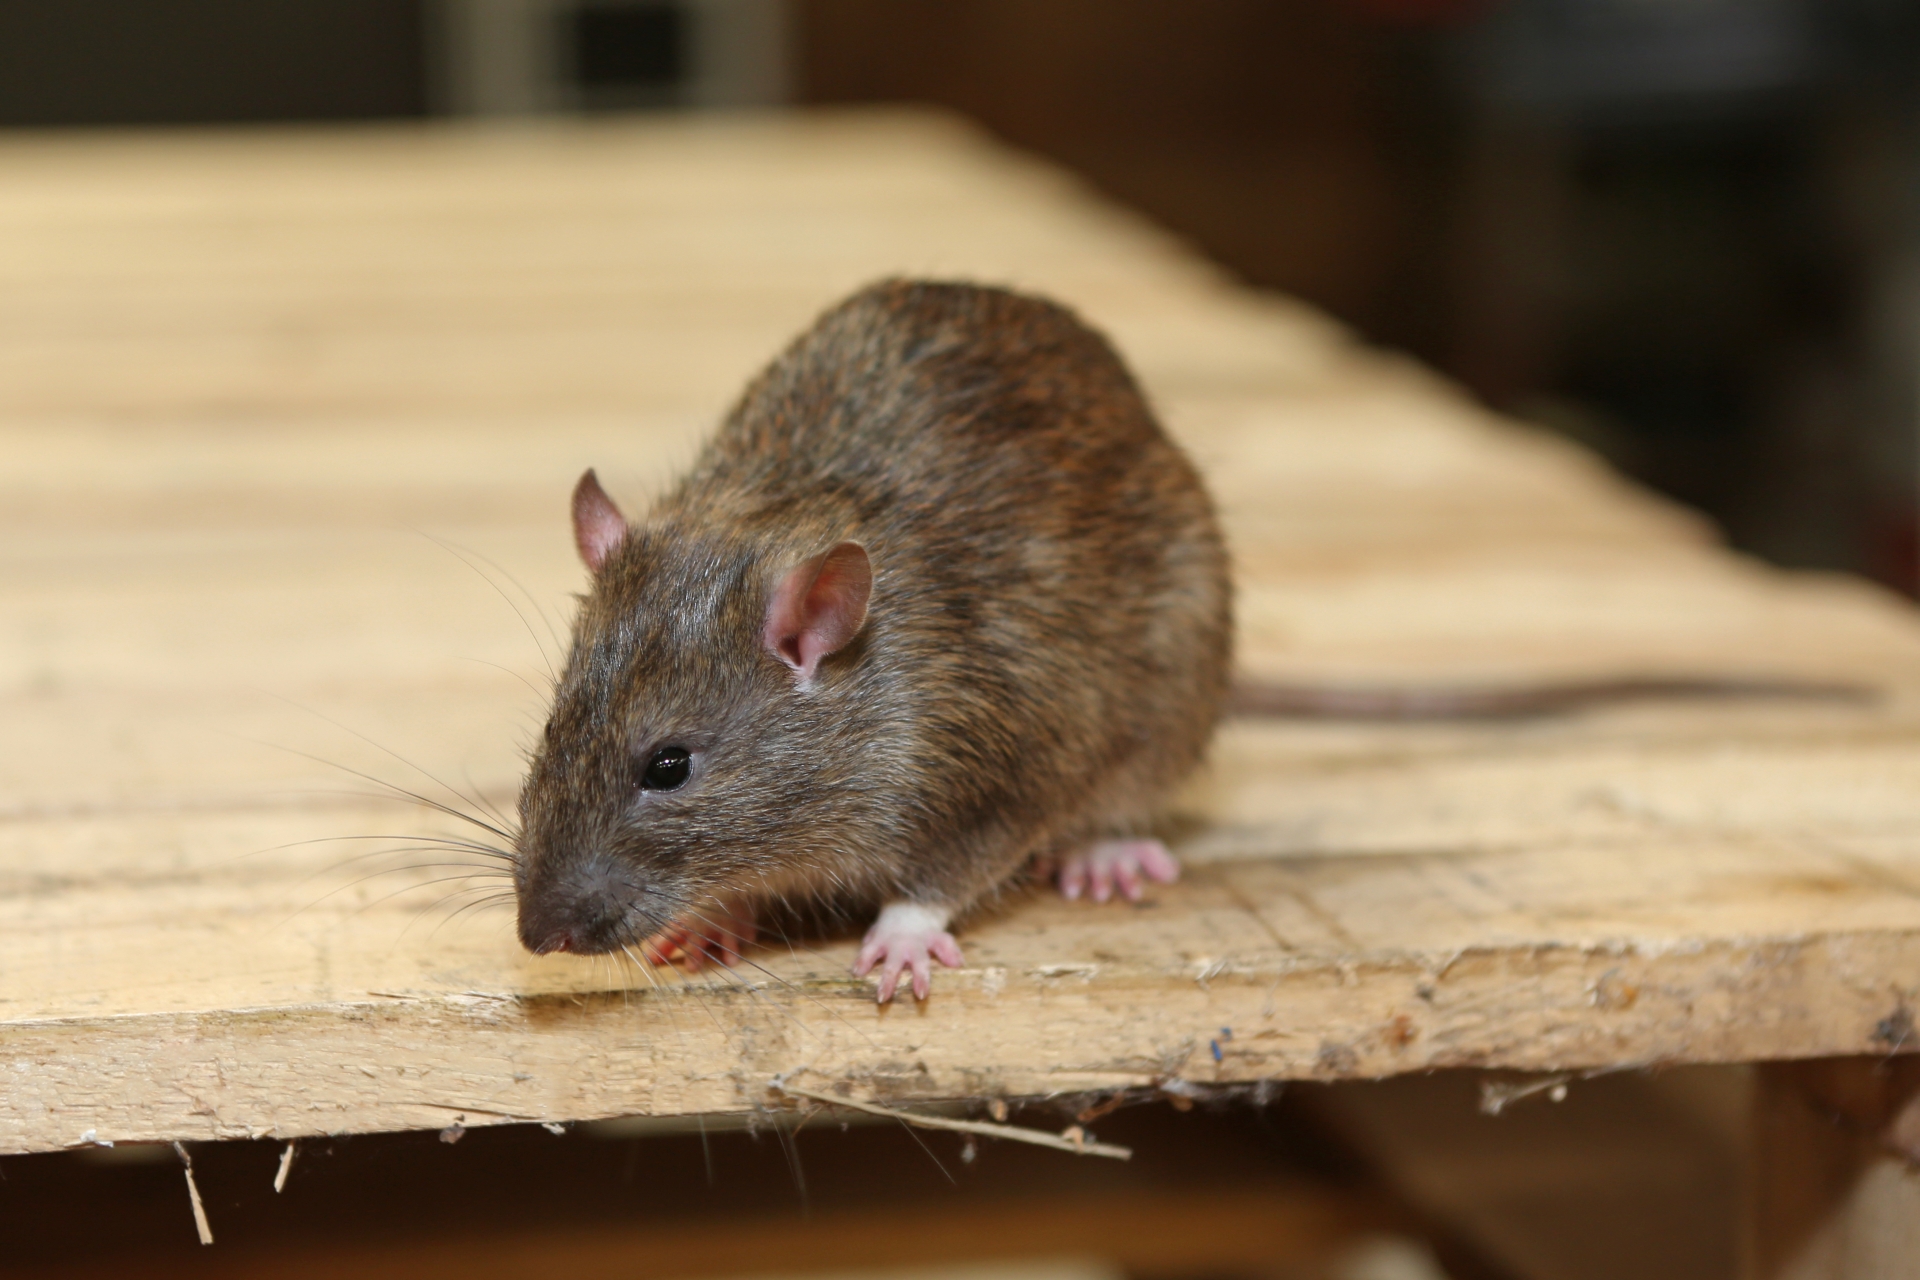 Rat Infestation, Pest Control in Notting Hill, W11. Call Now 020 8166 9746